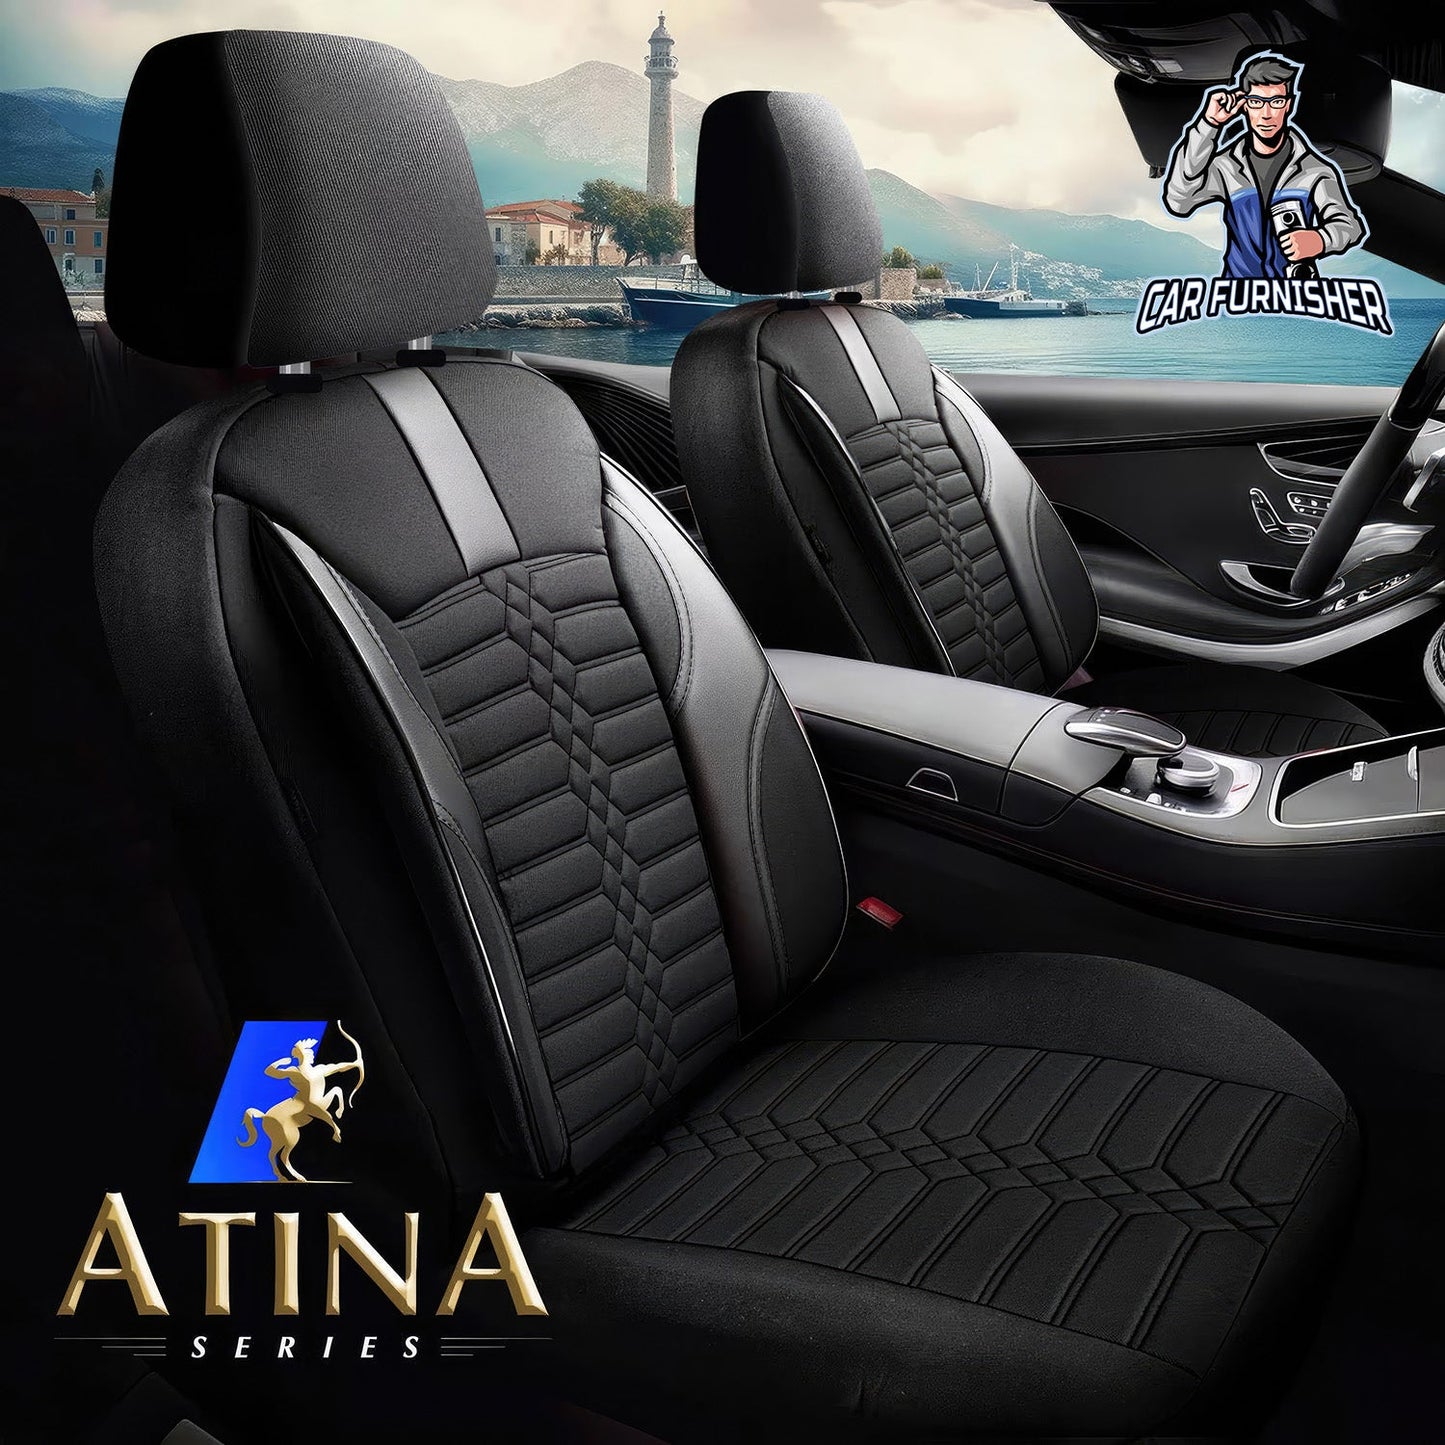 Volkswagen Jetta Seat Covers Athens Design Black 5 Seats + Headrests (Full Set) Leather & Jacquard Fabric